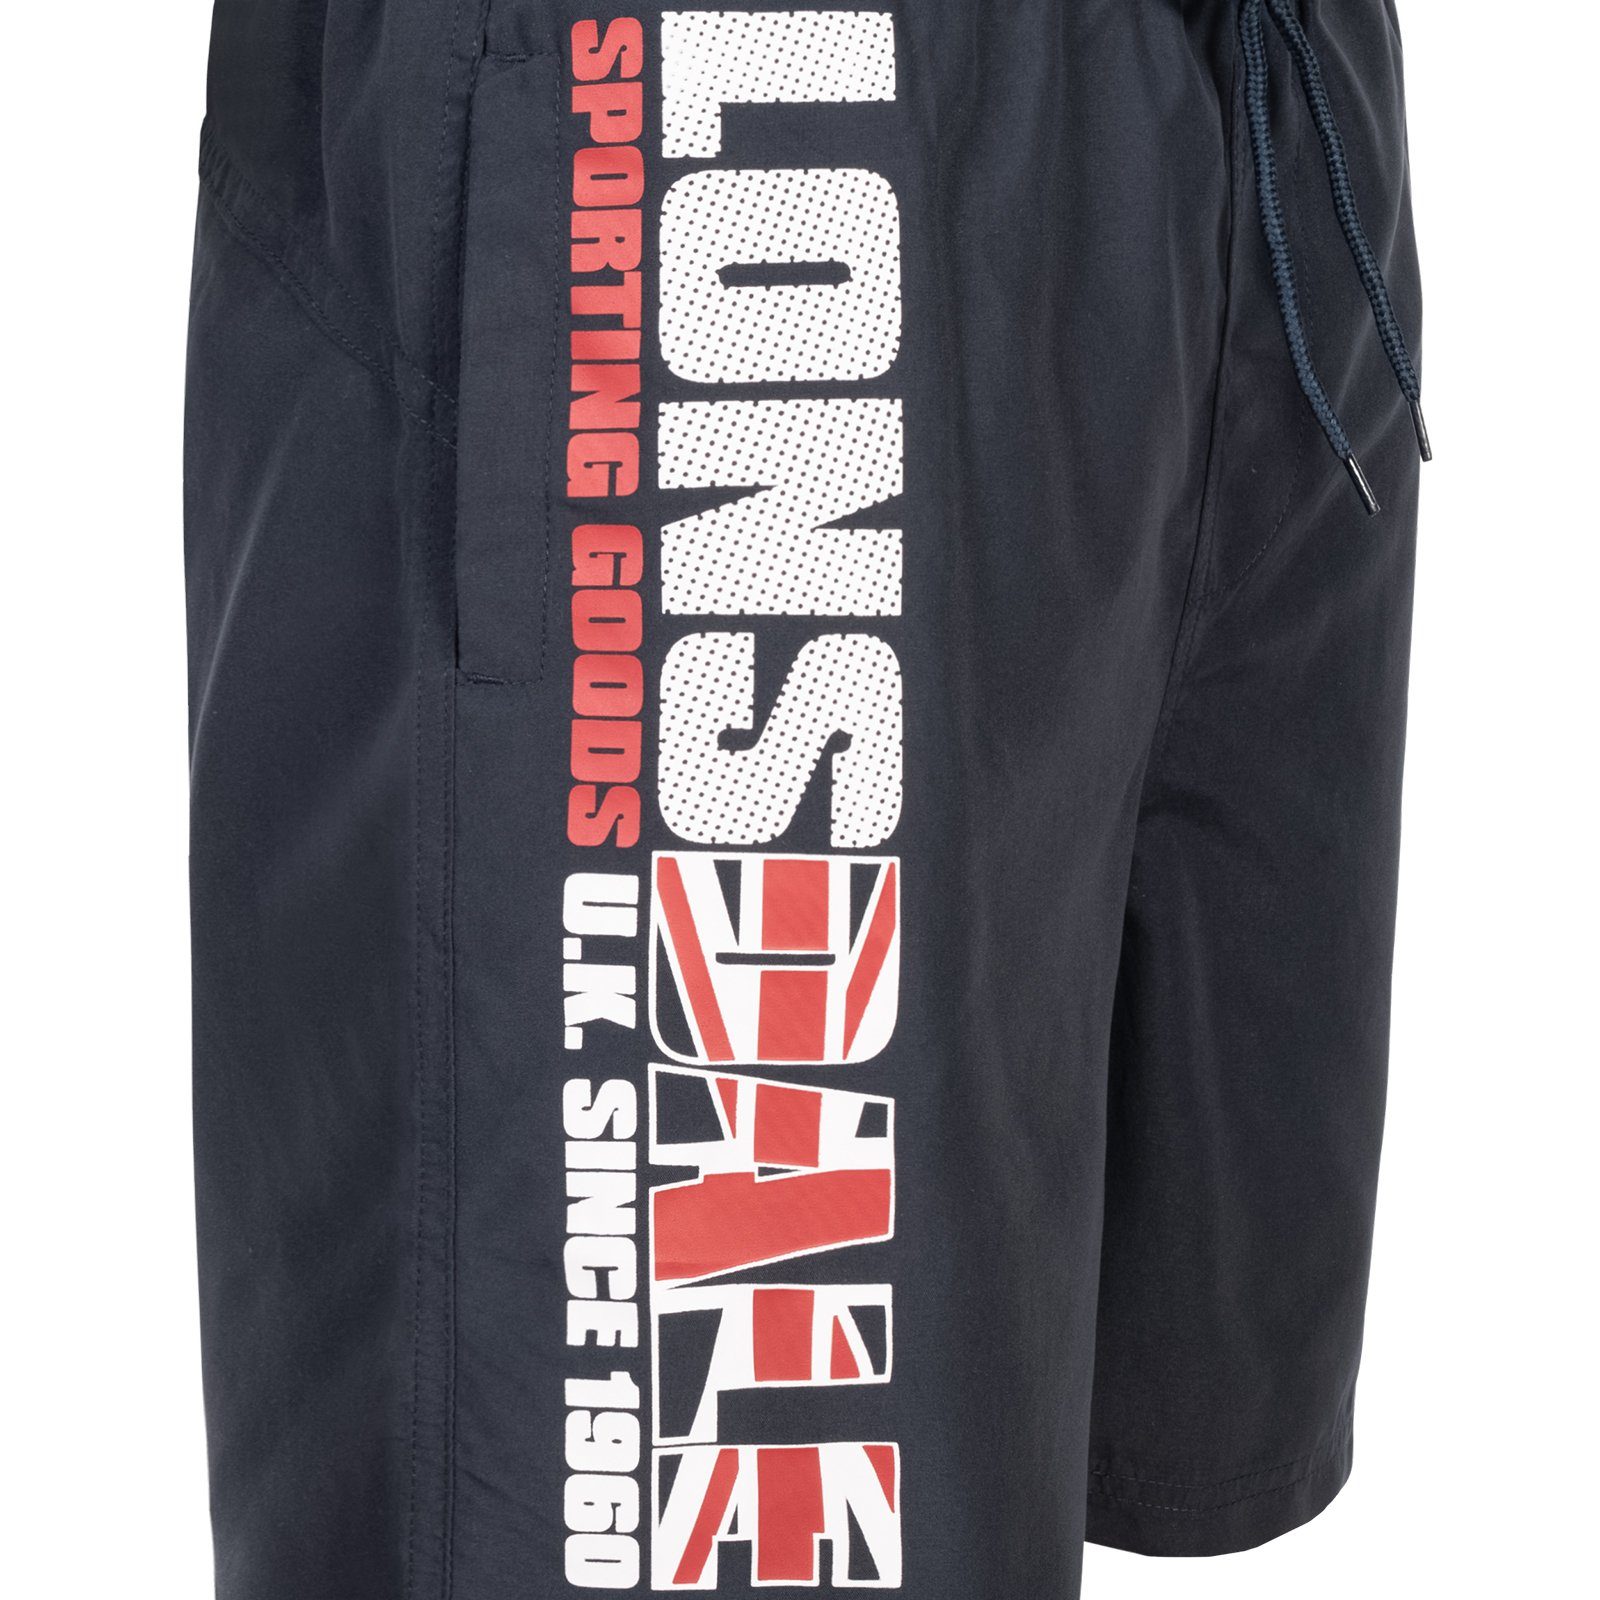 Lonsdale CARNKIE Navy/Red/White Badehose